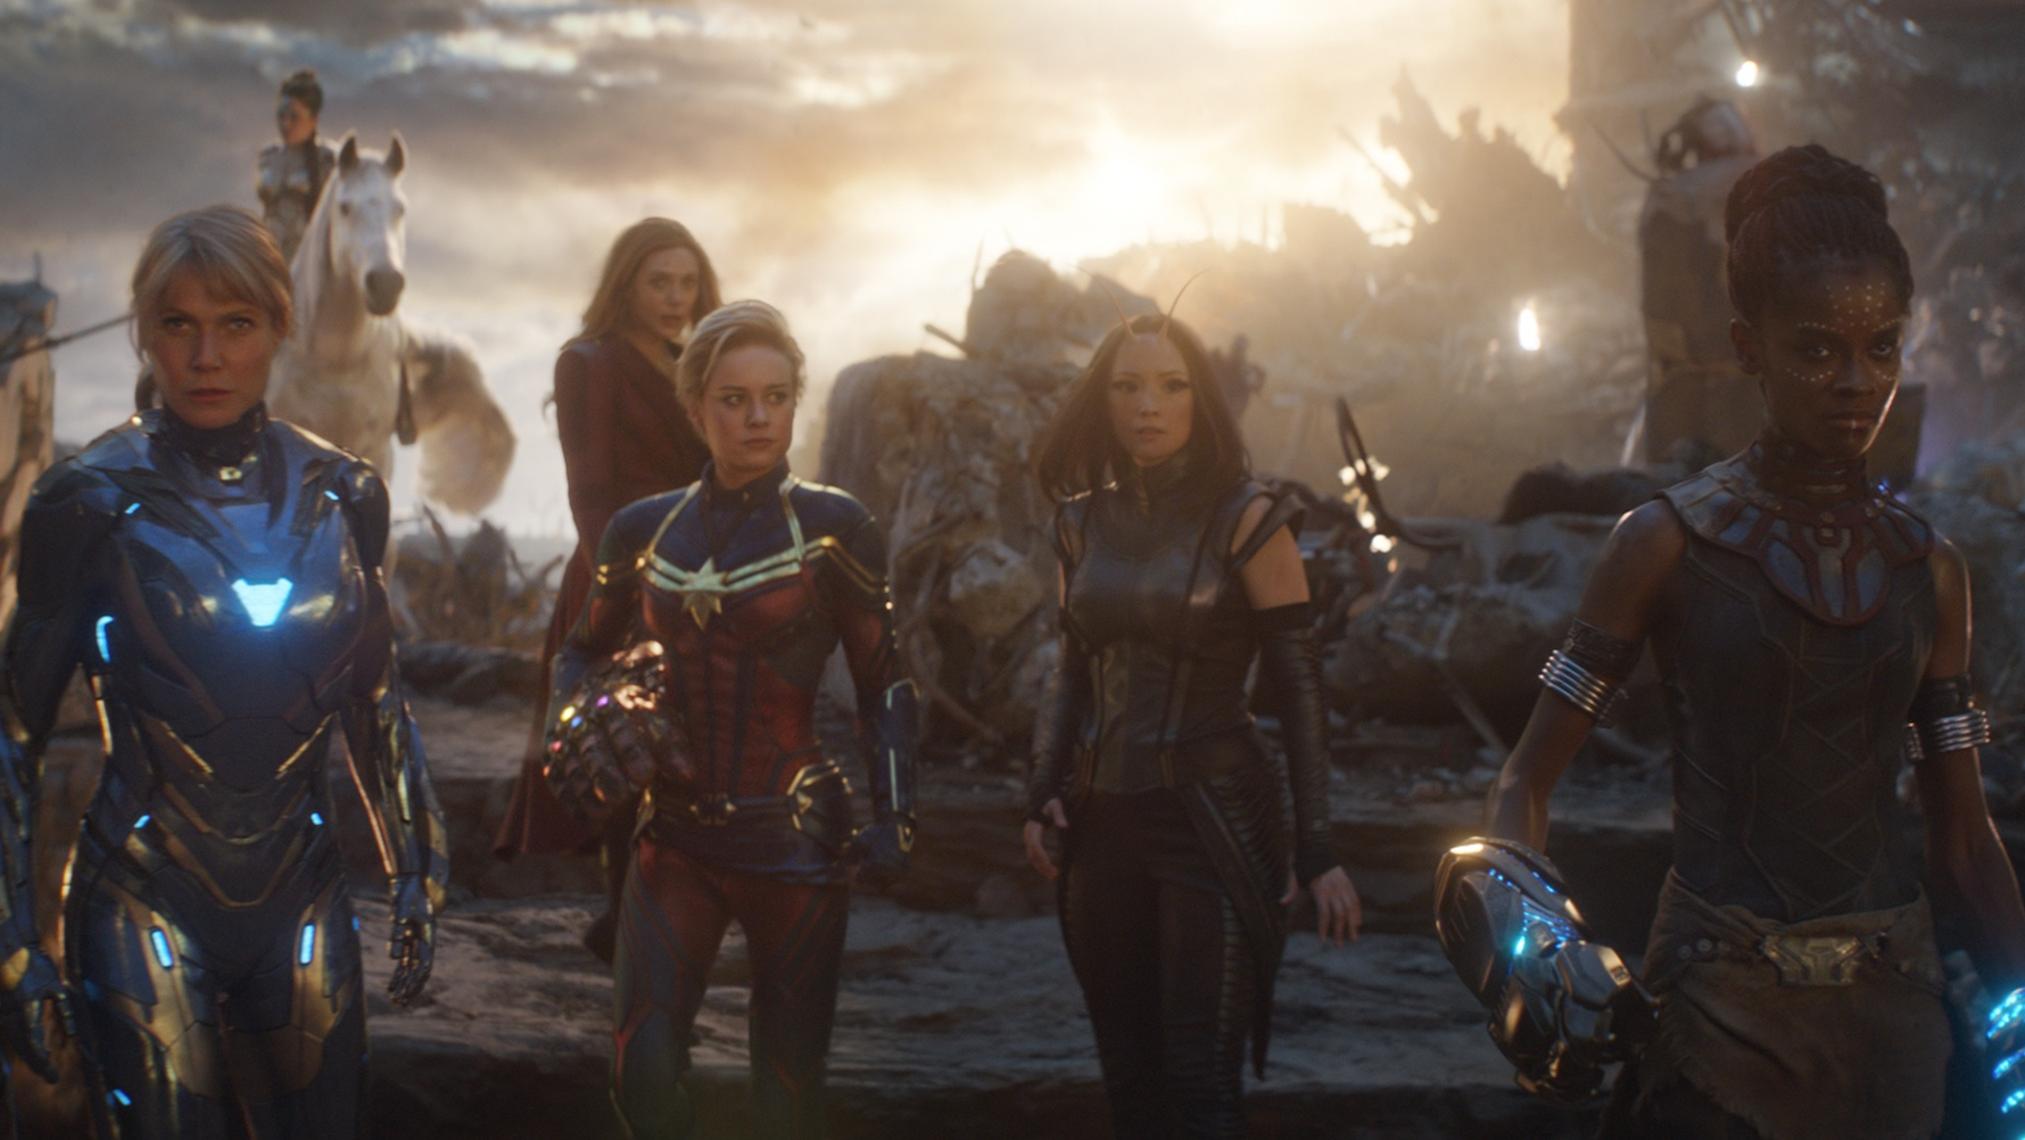 Avengers: Endgame' is what Marvel — and Hollywood — have been